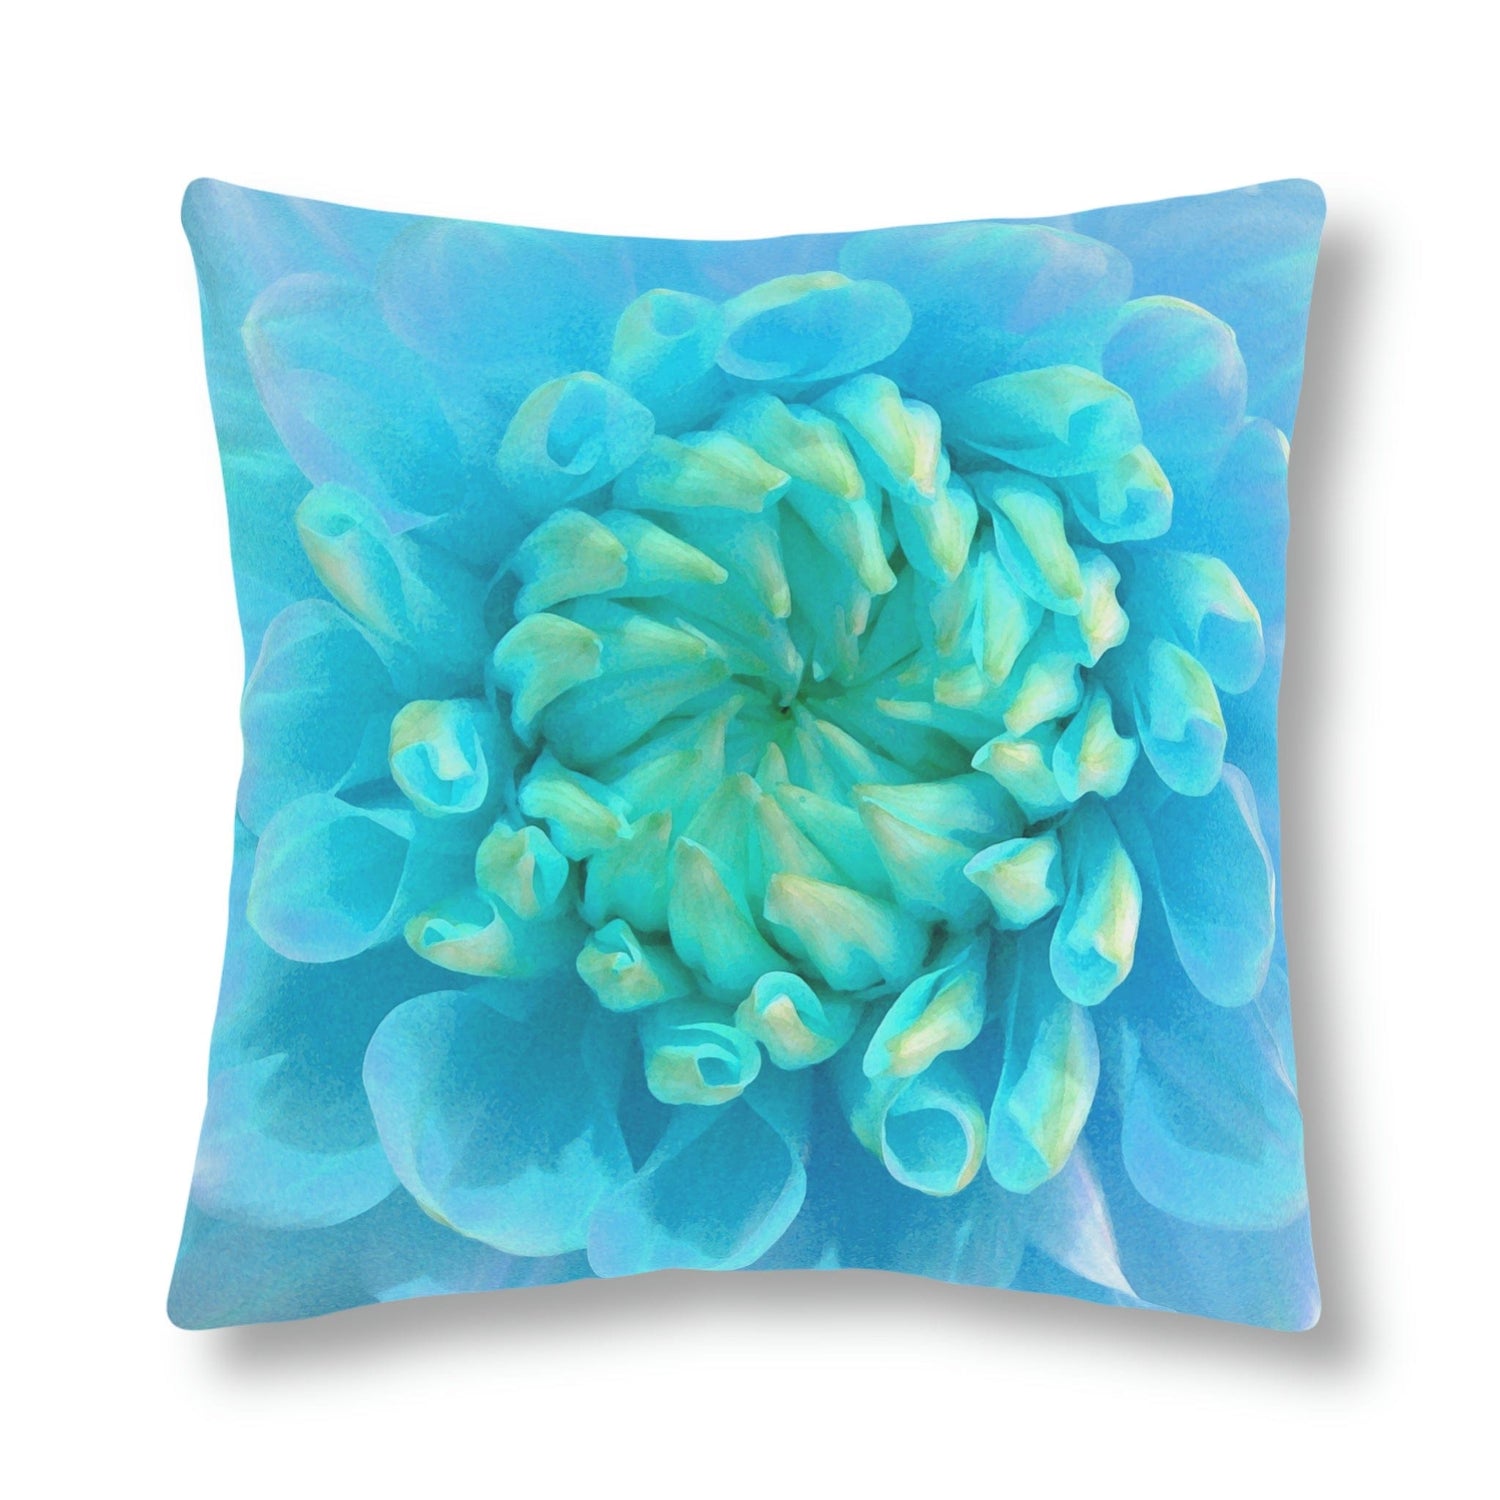 Kate McEnroe New York Outdoor Pillow in Painted Turquoise Dahlia FlowerThrow Pillows30427470663094431475